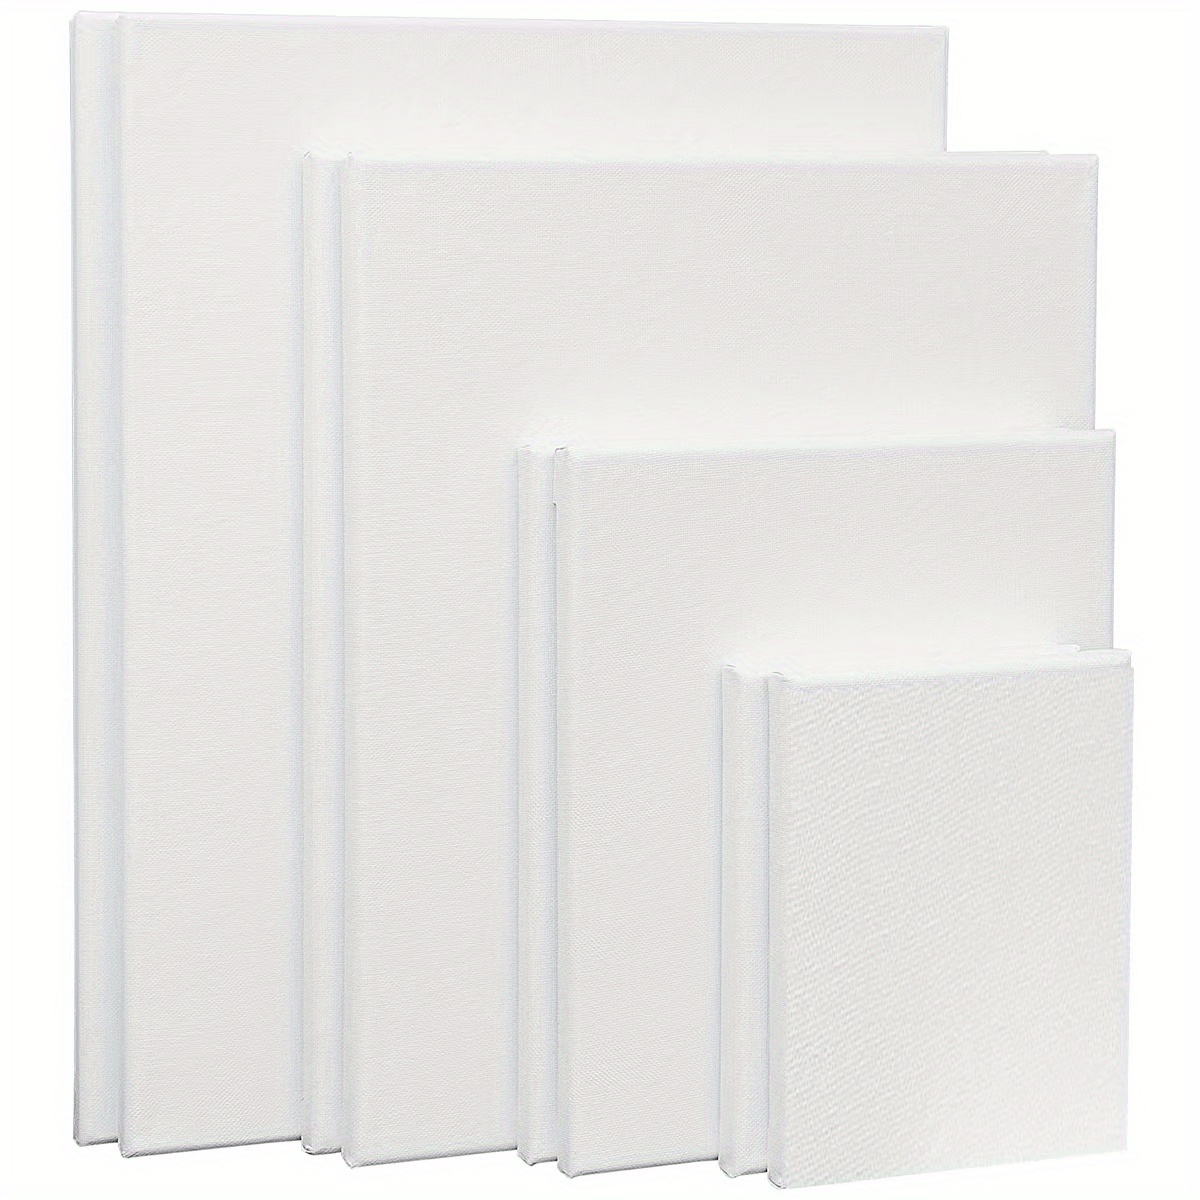  Arteza Paint Canvases for Painting, Pack of 28, 8 x 10 Inches,  Blank White Art Canvas Boards, 100% Cotton, 8 oz Gesso-Primed, Art Supplies  for Adults and Teens, for Acrylic Pouring